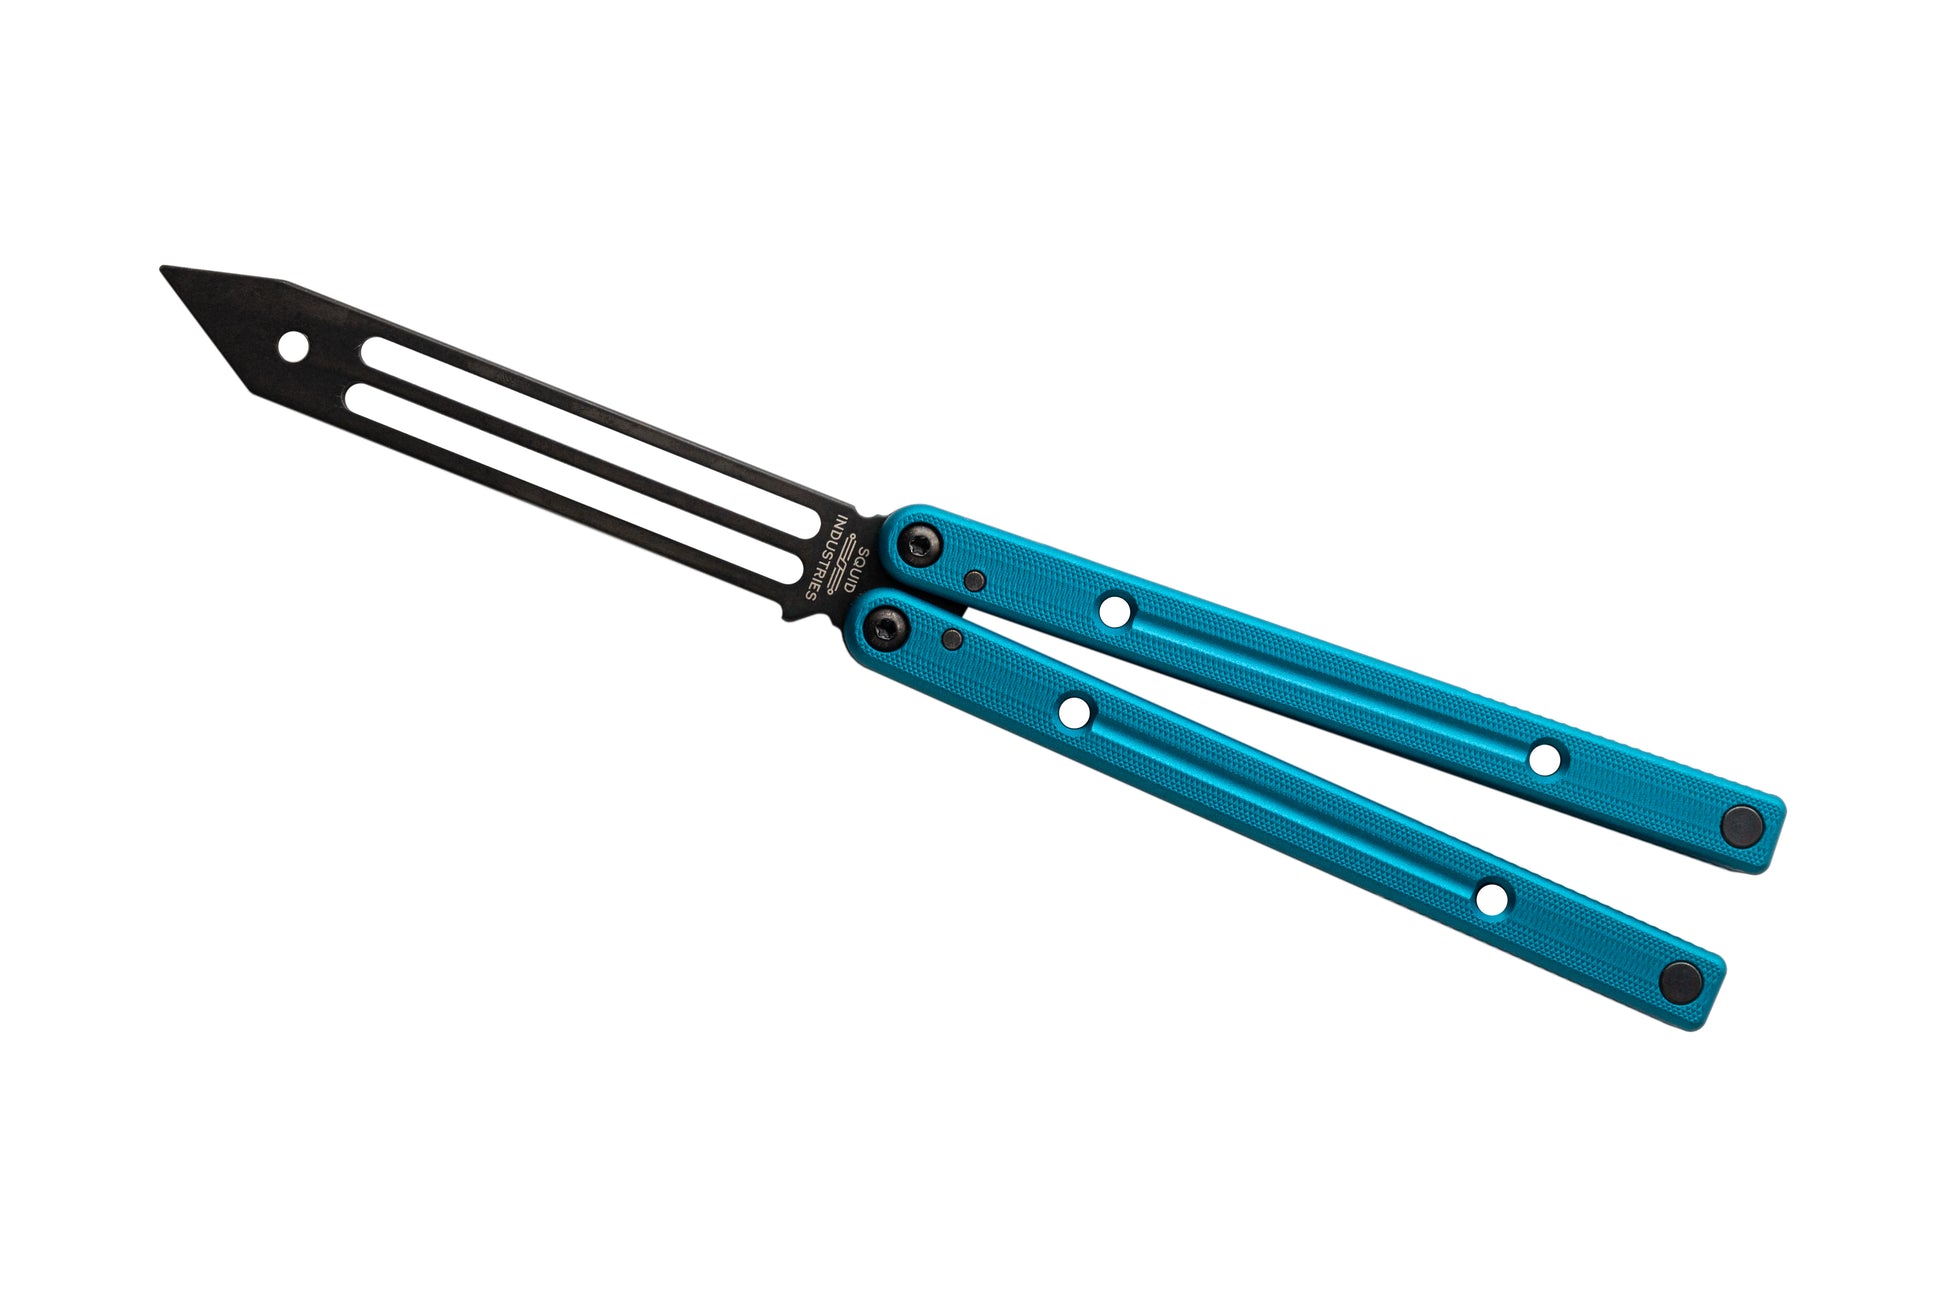 Inked Teal Clearance Blemished Squidtrainer V4 Balisong Butterfly Knife Trainer 